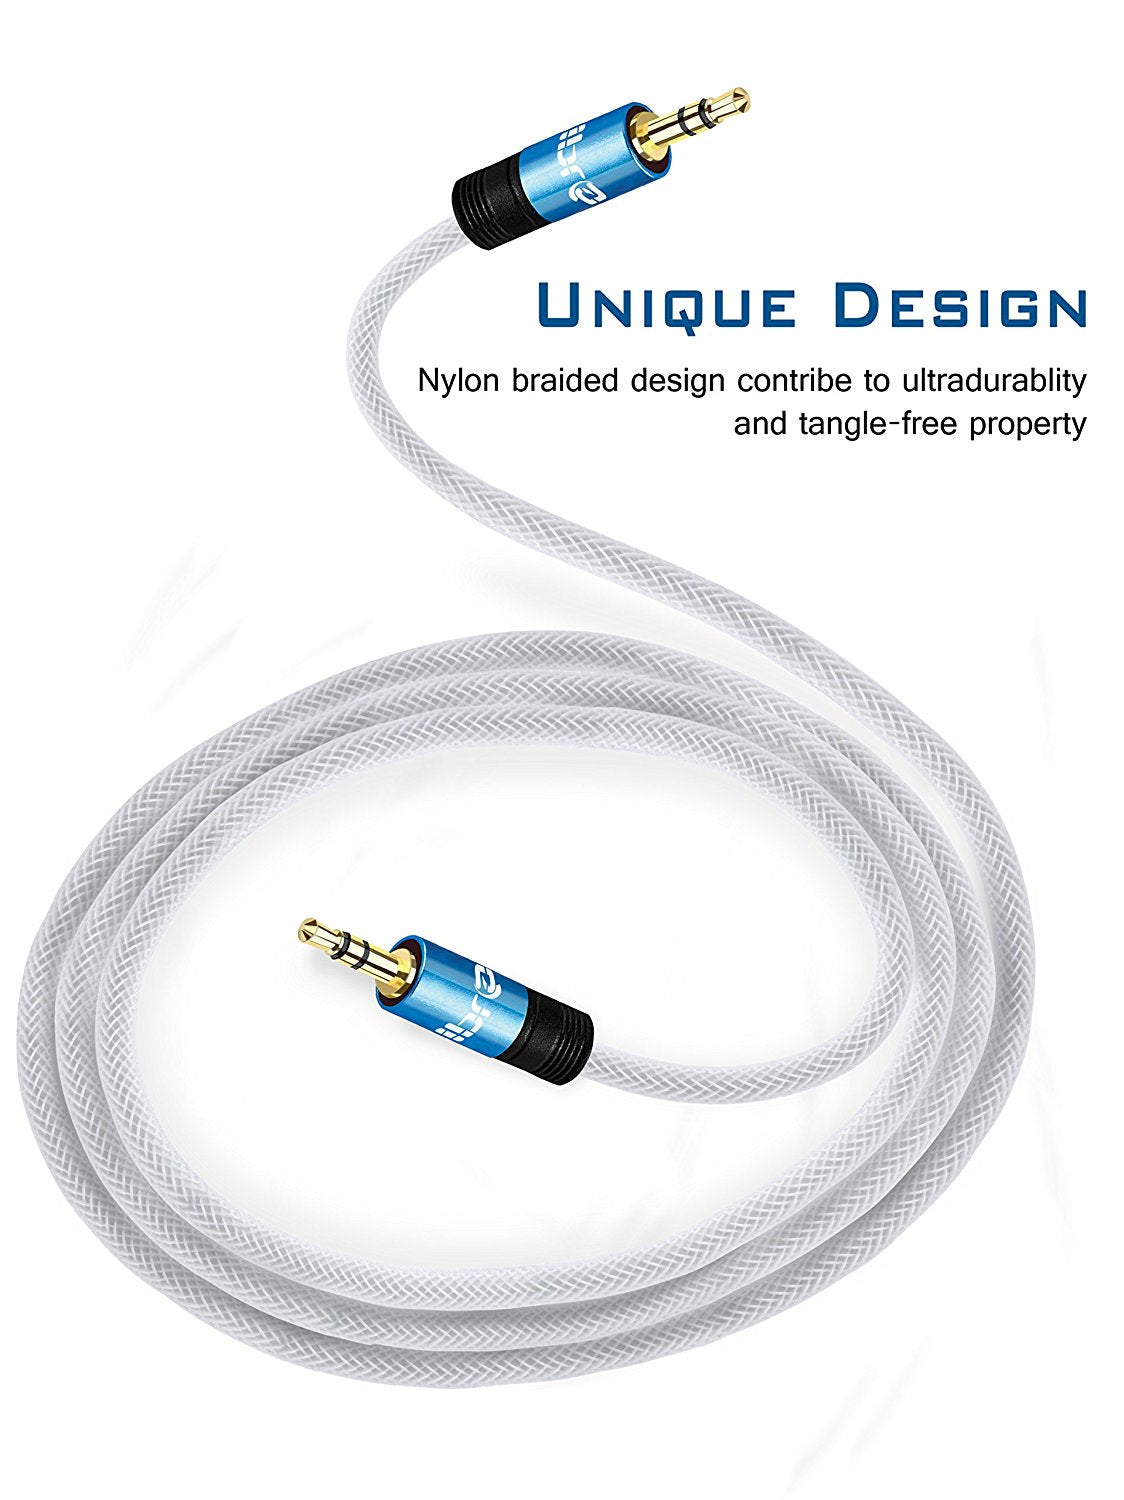 3.5mm Stereo Jack to Jack Audio Cable Lead Gold 5m- IBRA Blue Series